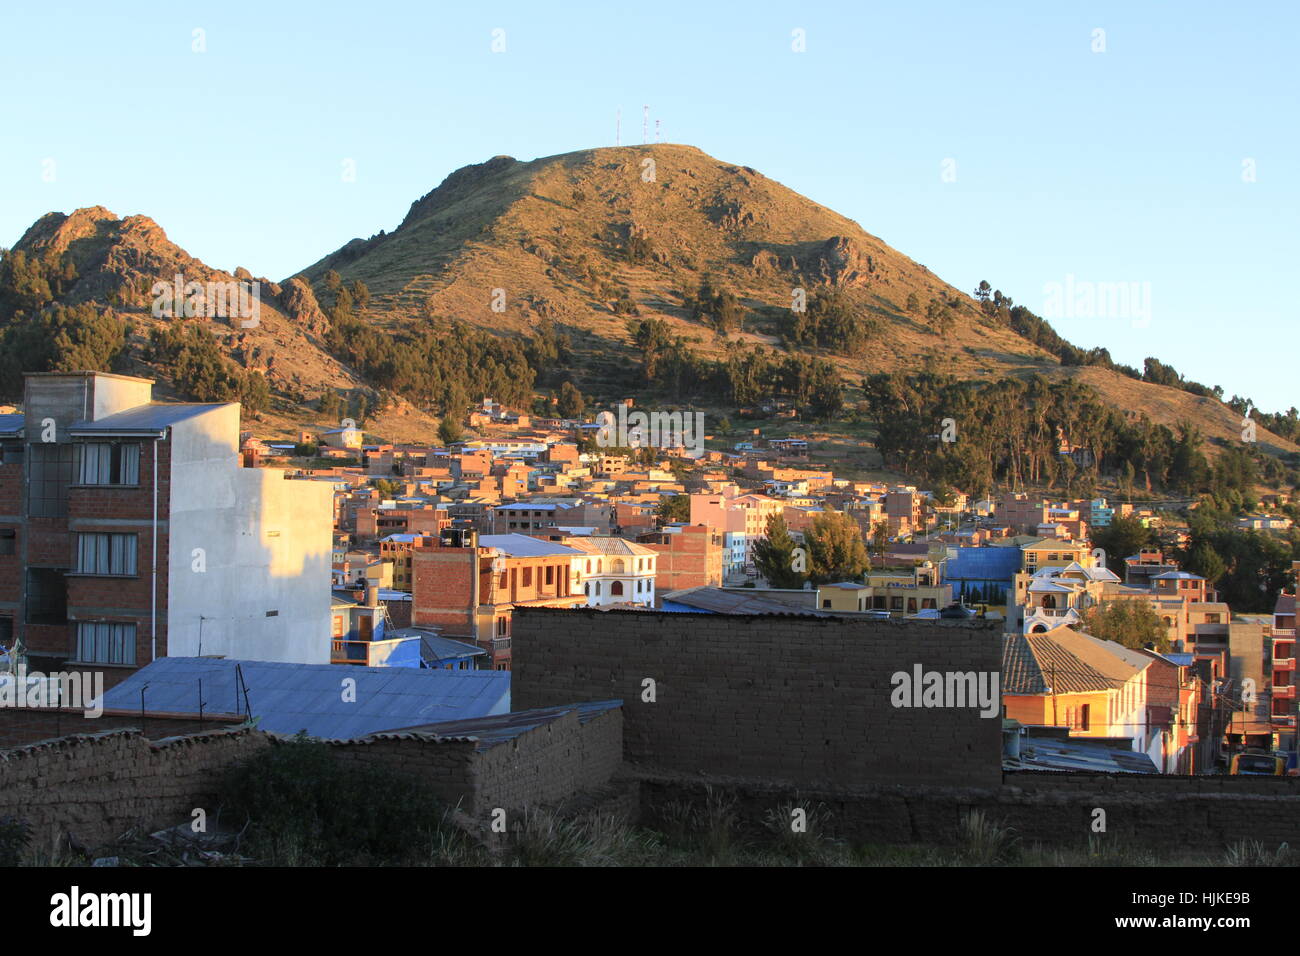 travel, buildings, city, town, hill, mountains, sunset, tourism, beach, Stock Photo